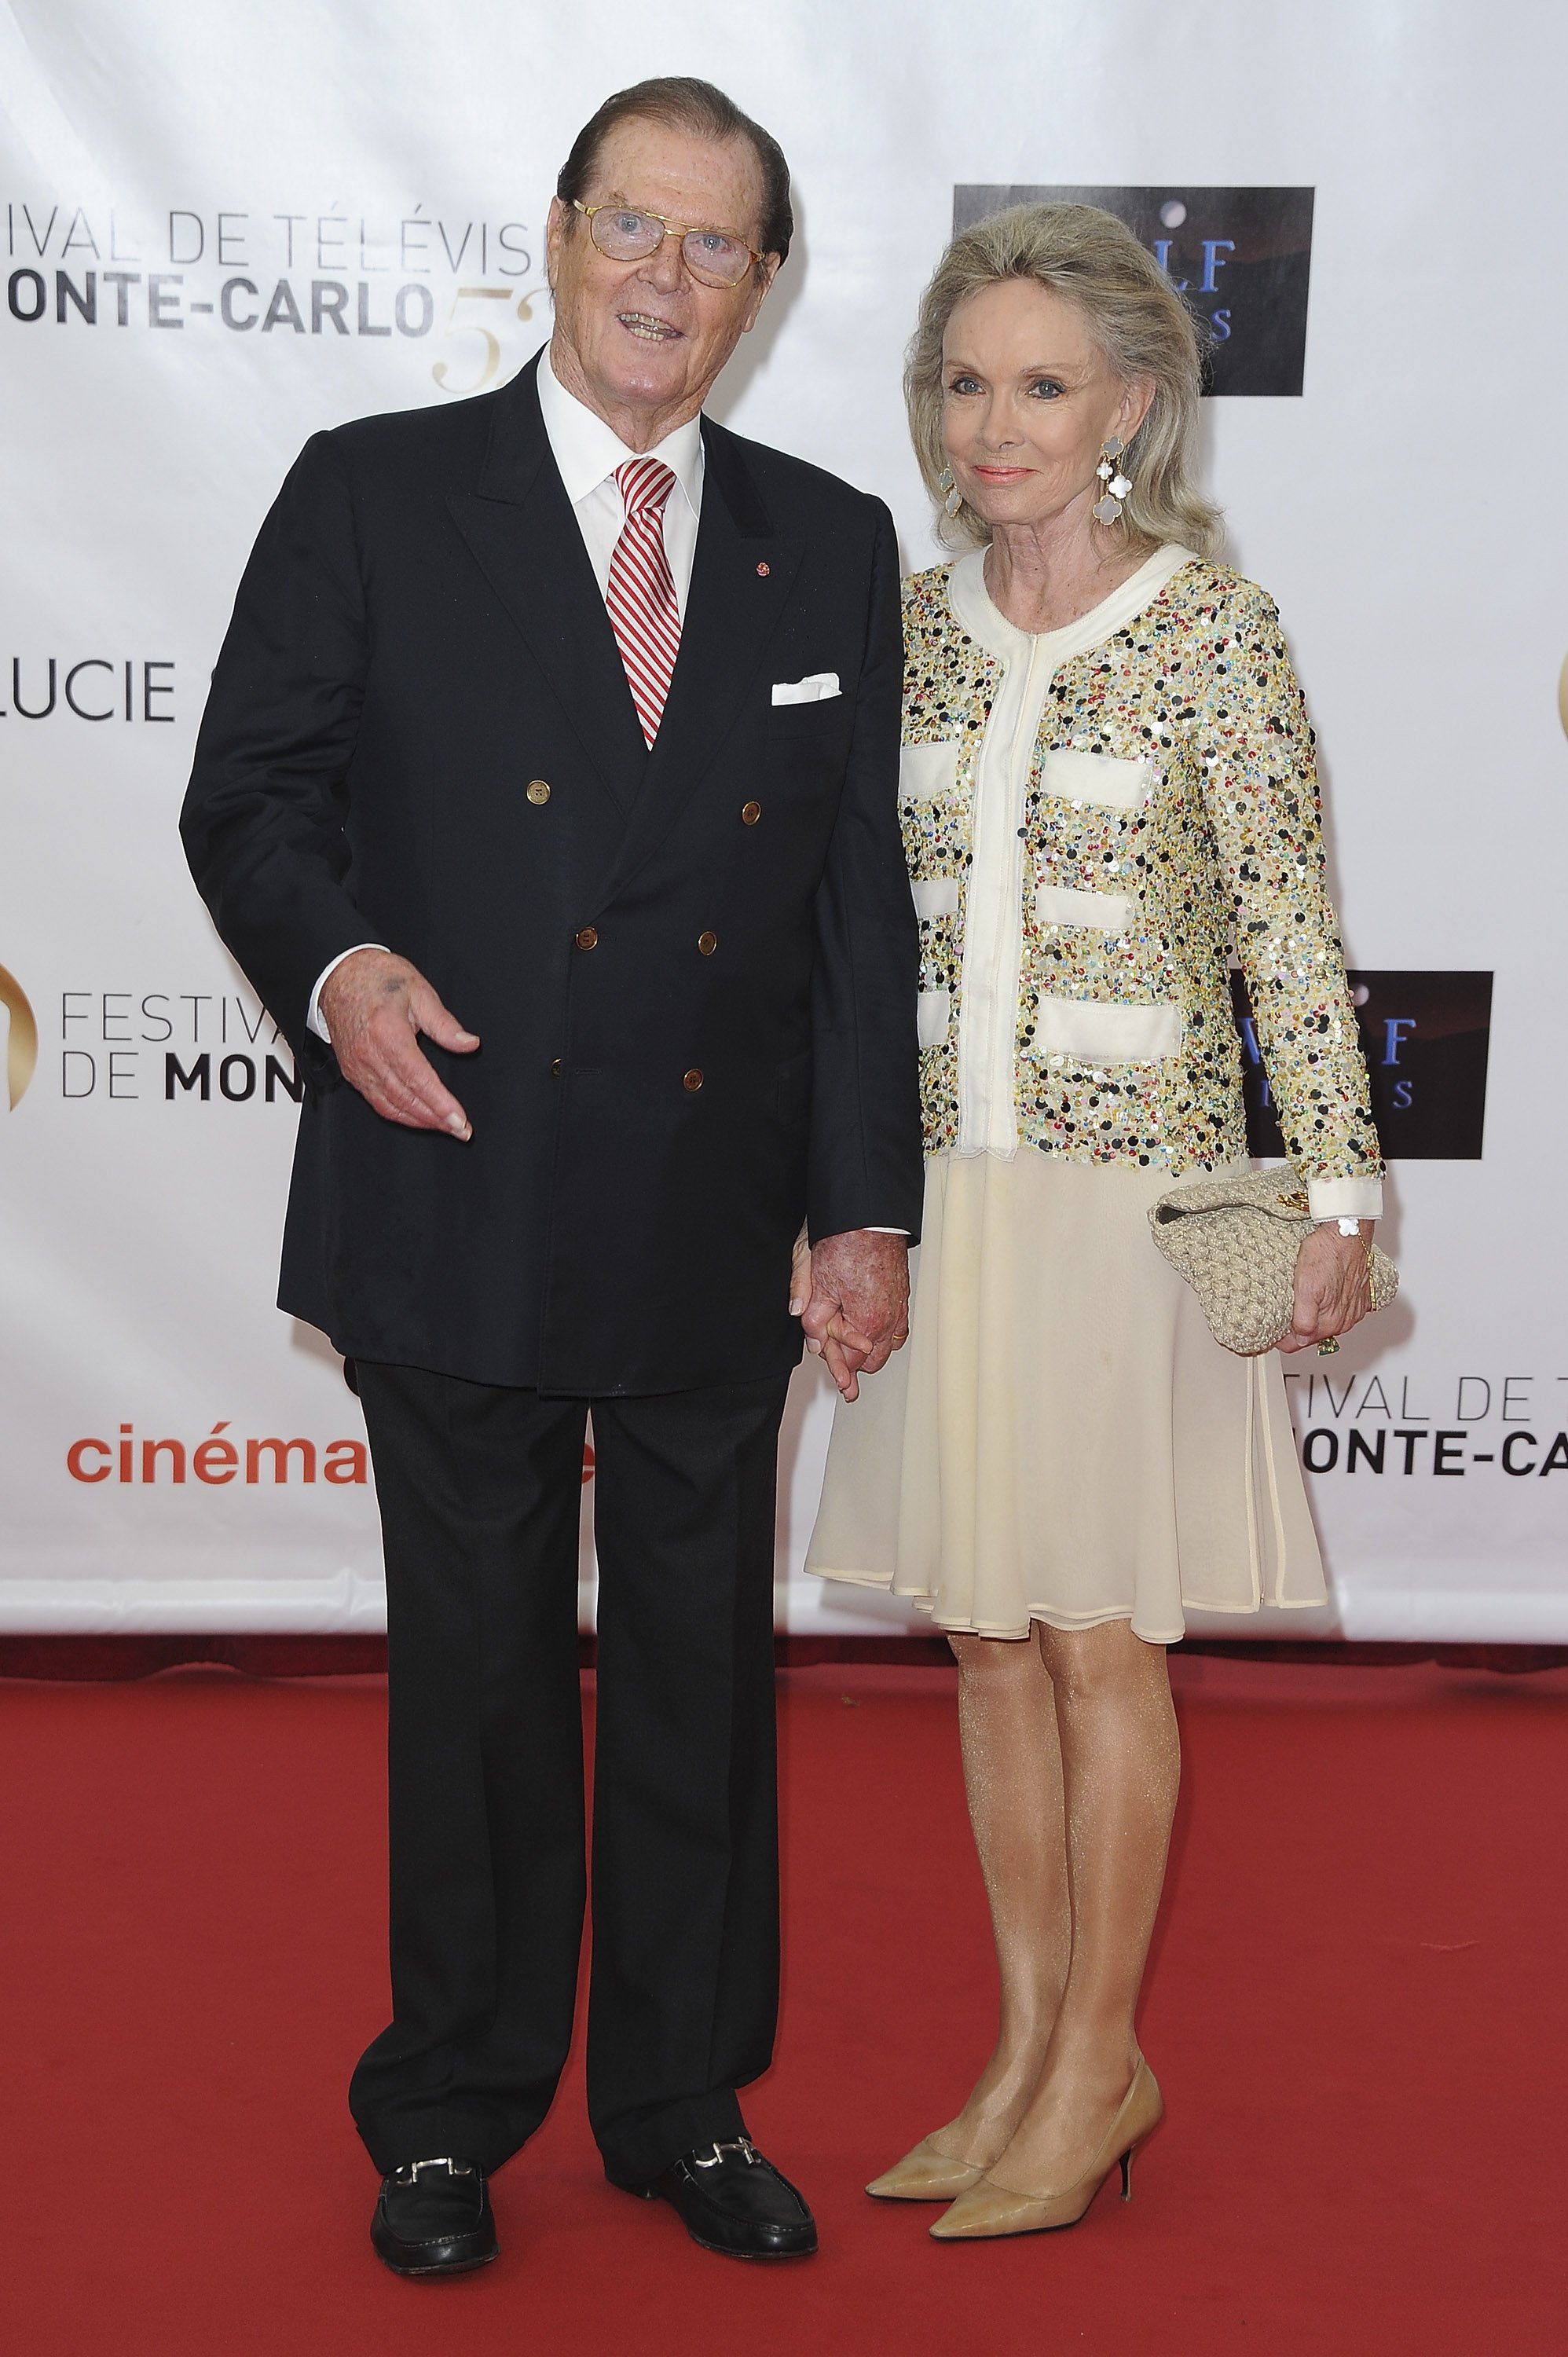  British actor Roger Moore and his wife Kristina Tholstrup arrive at the opening ceremony of the 2012 Monte Carlo Television Festival held at Grimaldi Forum on June 10, 2012 in Monte-Carlo, Monaco | Source: Getty Images